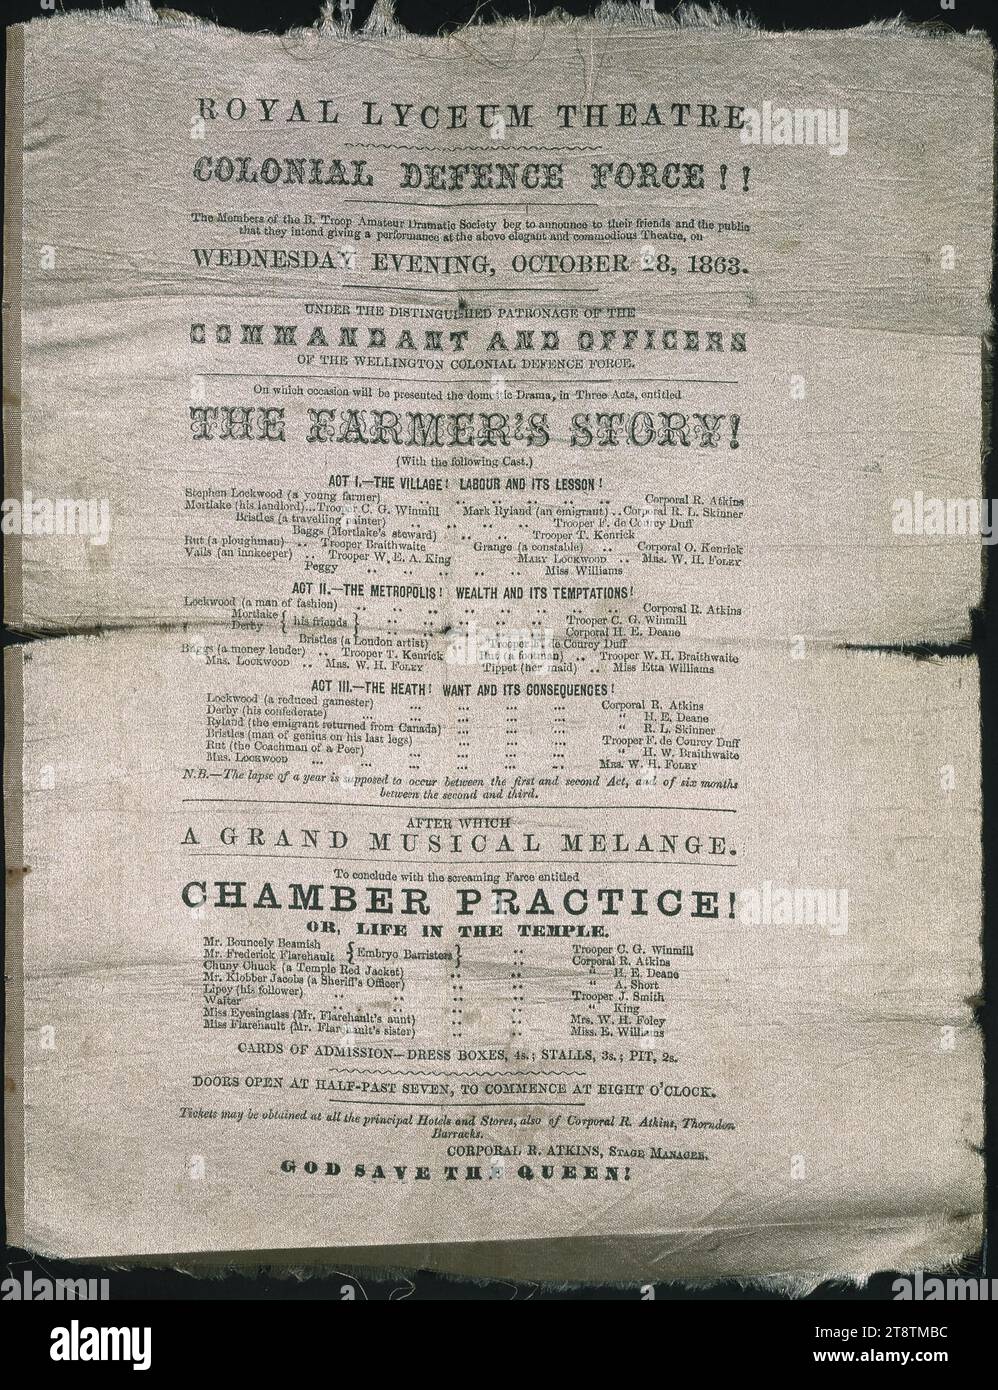 Royal Lyceum Theatre: Colonial Defence Force!! The members of the B Troop Amateur Dramatic Society beg to announce .. a performance at the above elegant and commodious theatre, on Wednesday evening, October 28, 1863, under the distinguished patronage of, Arrangment of text. Cast members included: Corporal R Atkins, Corporal R L Skinner, Trooper F de Courcy Duff, Trooper T Kenrick, Corporal O Kenrick, Mrs W H Foley, Mary Lockwood, Trooper C G Winmill, Trooper H W Braithwaite, Trooper W E A King, Corporal H E Deane, Corporal A Short, Prooper J Smith, Miss Etta Williams. Stock Photo